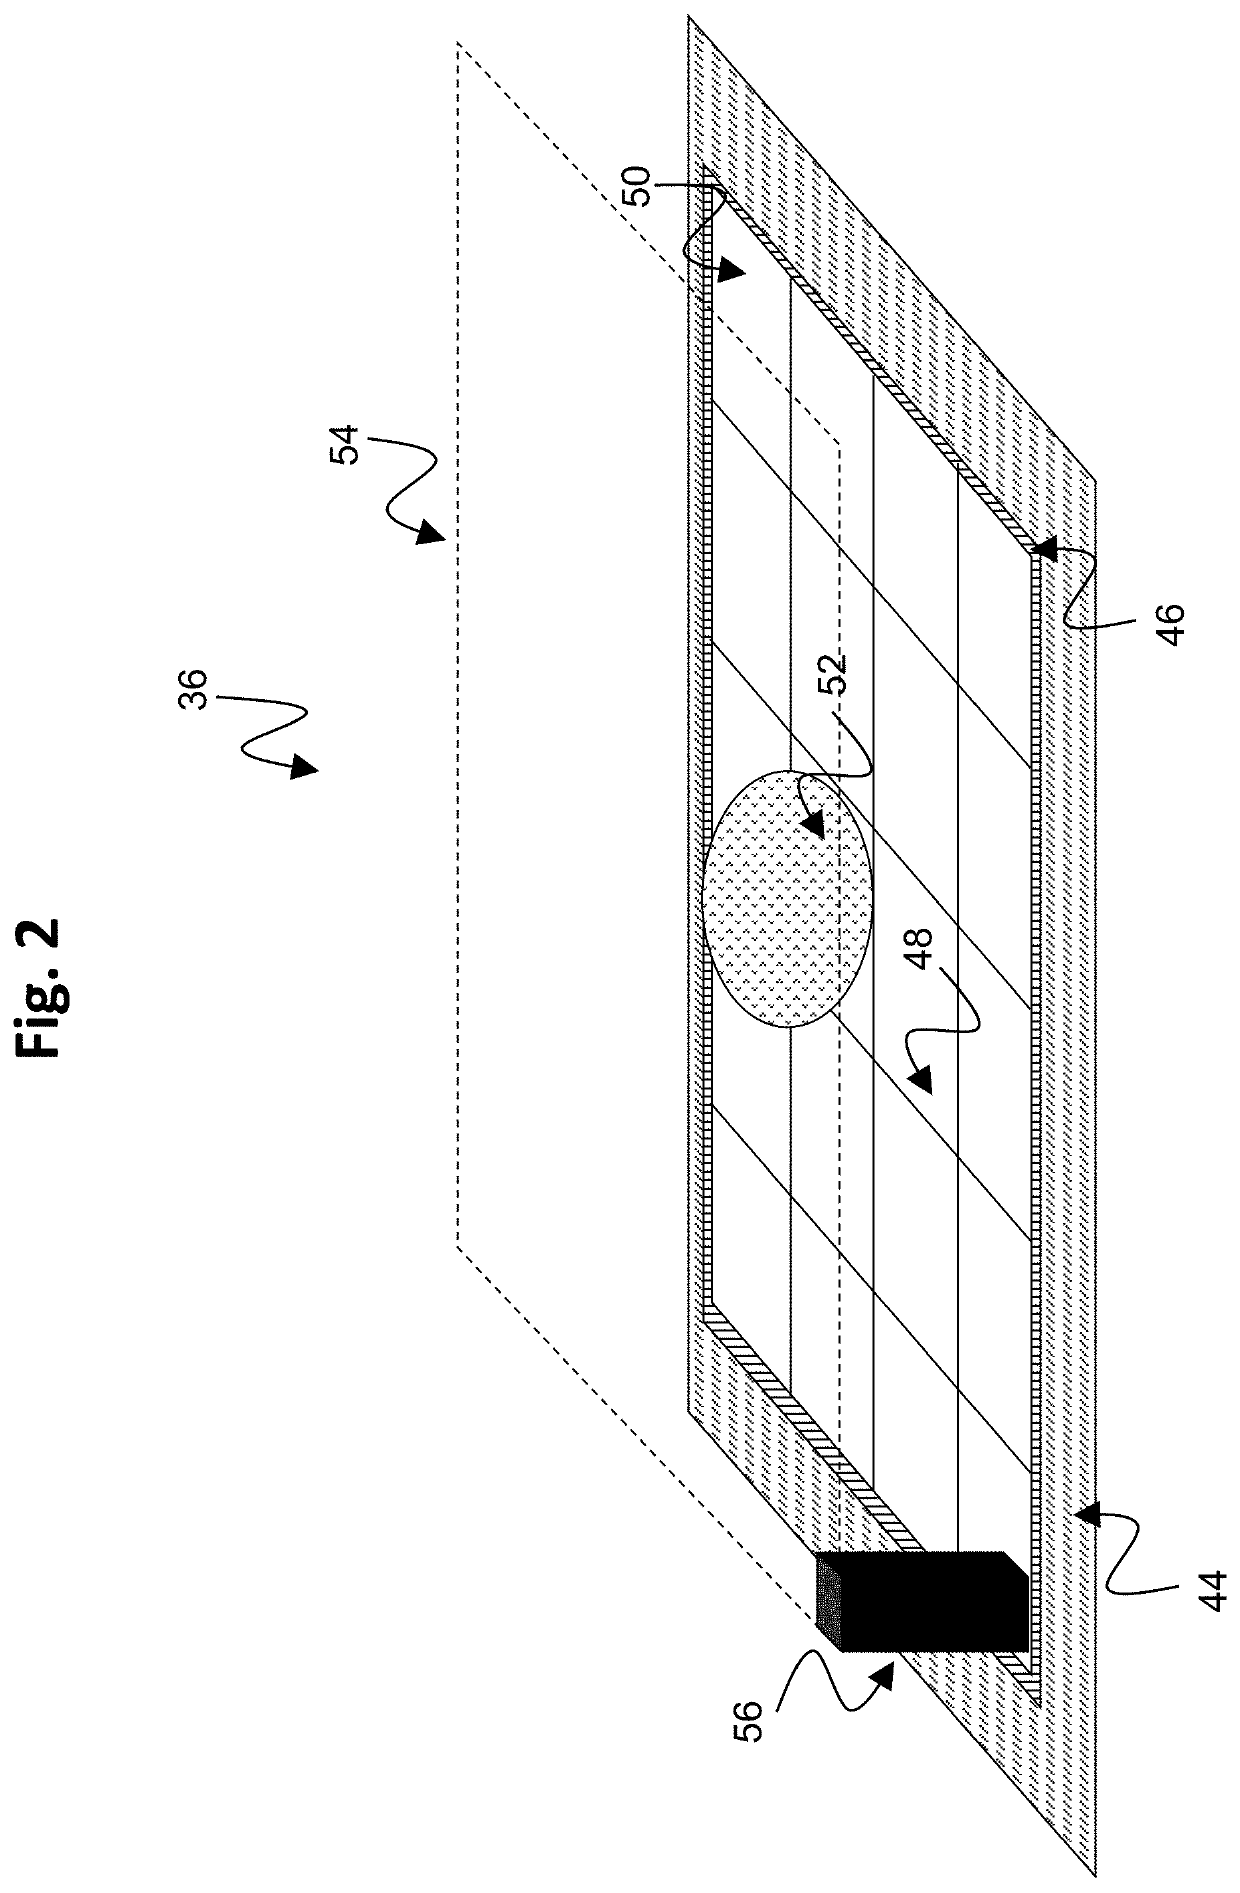 Molecular separation by diffusion using an ewod device